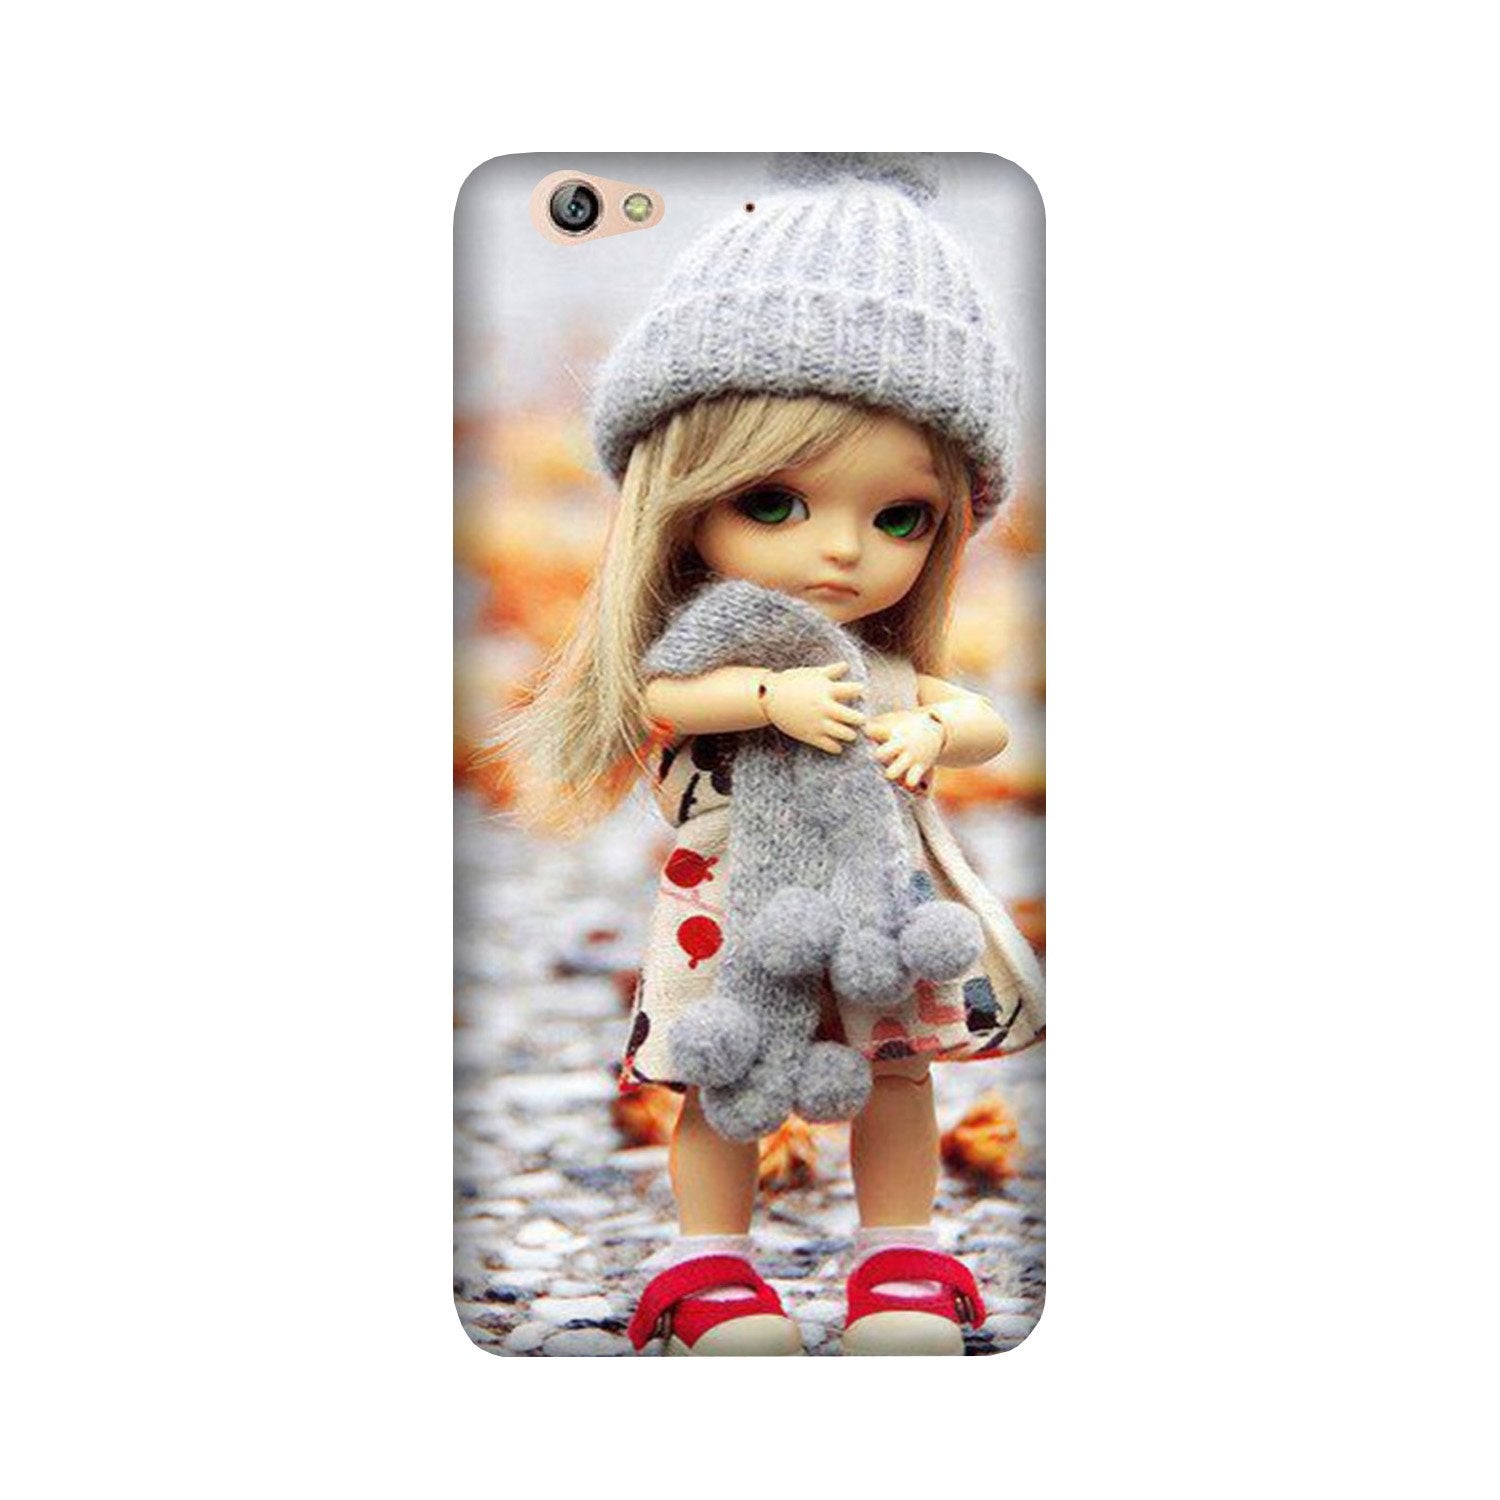 Cute Doll Case for Gionee S6